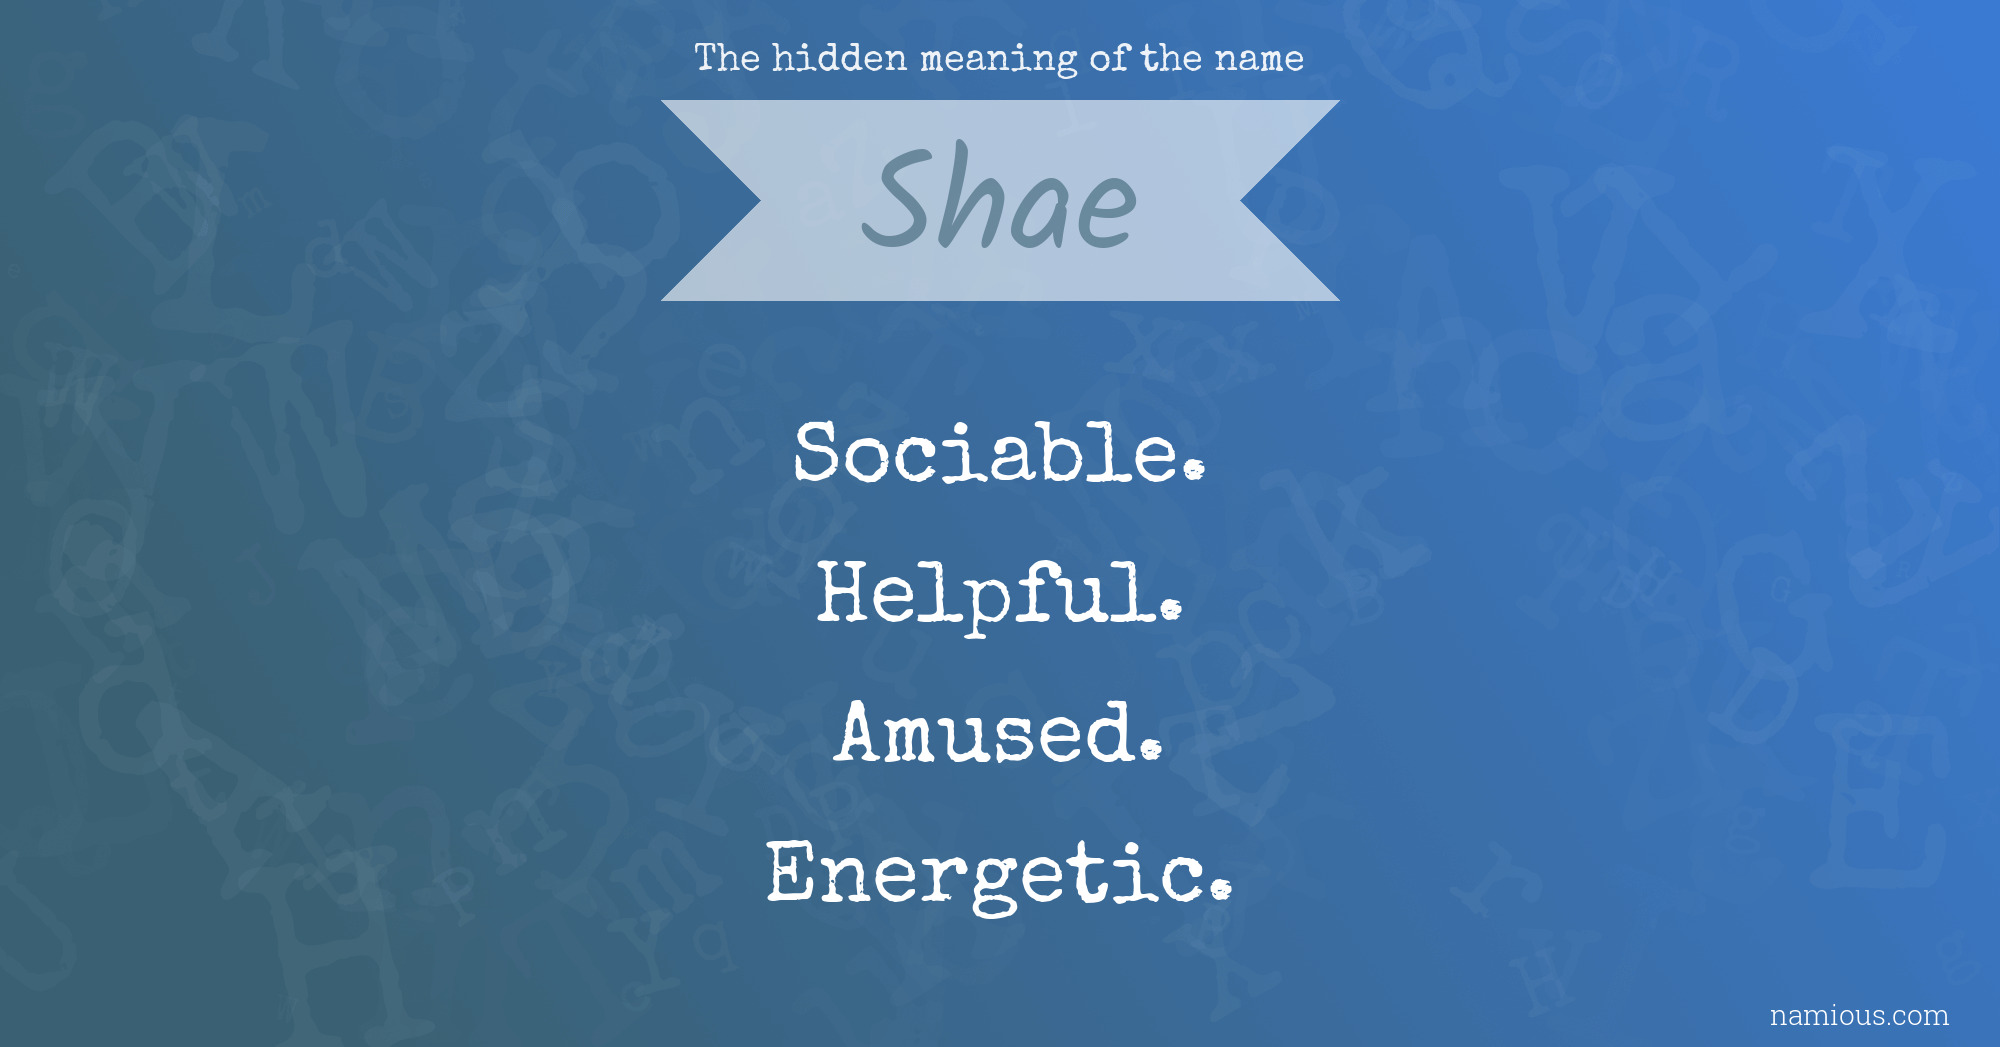 The hidden meaning of the name Shae